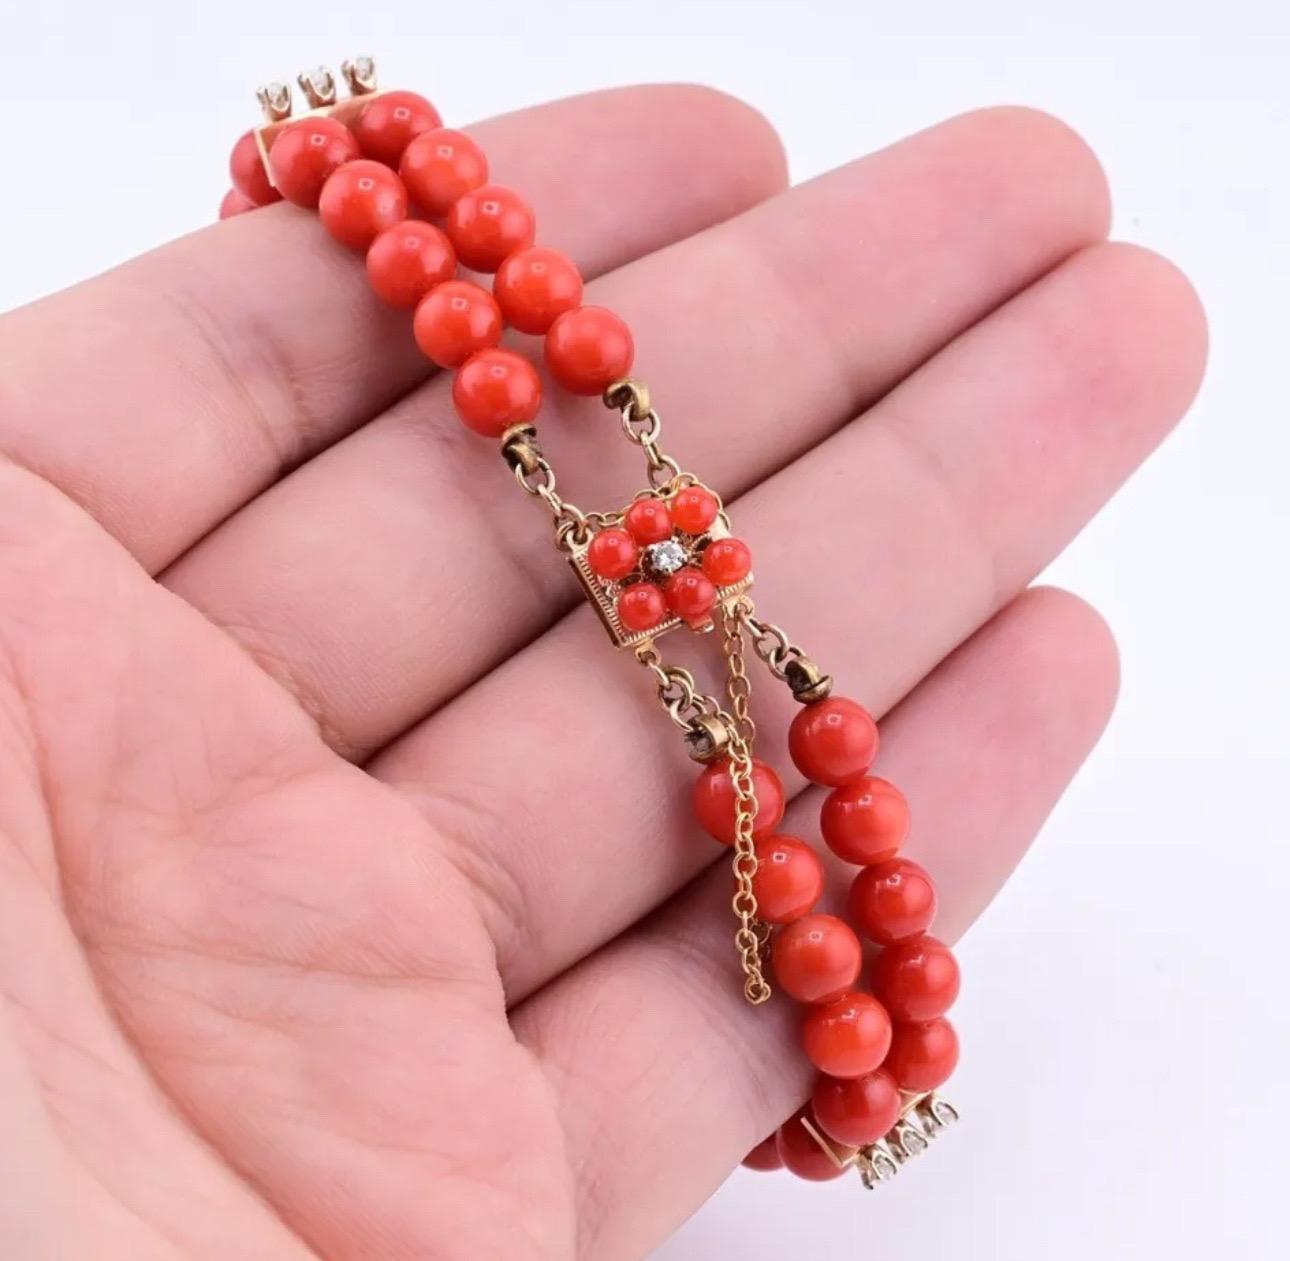 Fabulous Blood Red Coral Bracelet With Natural Diamonds  In Good Condition For Sale In Media, PA